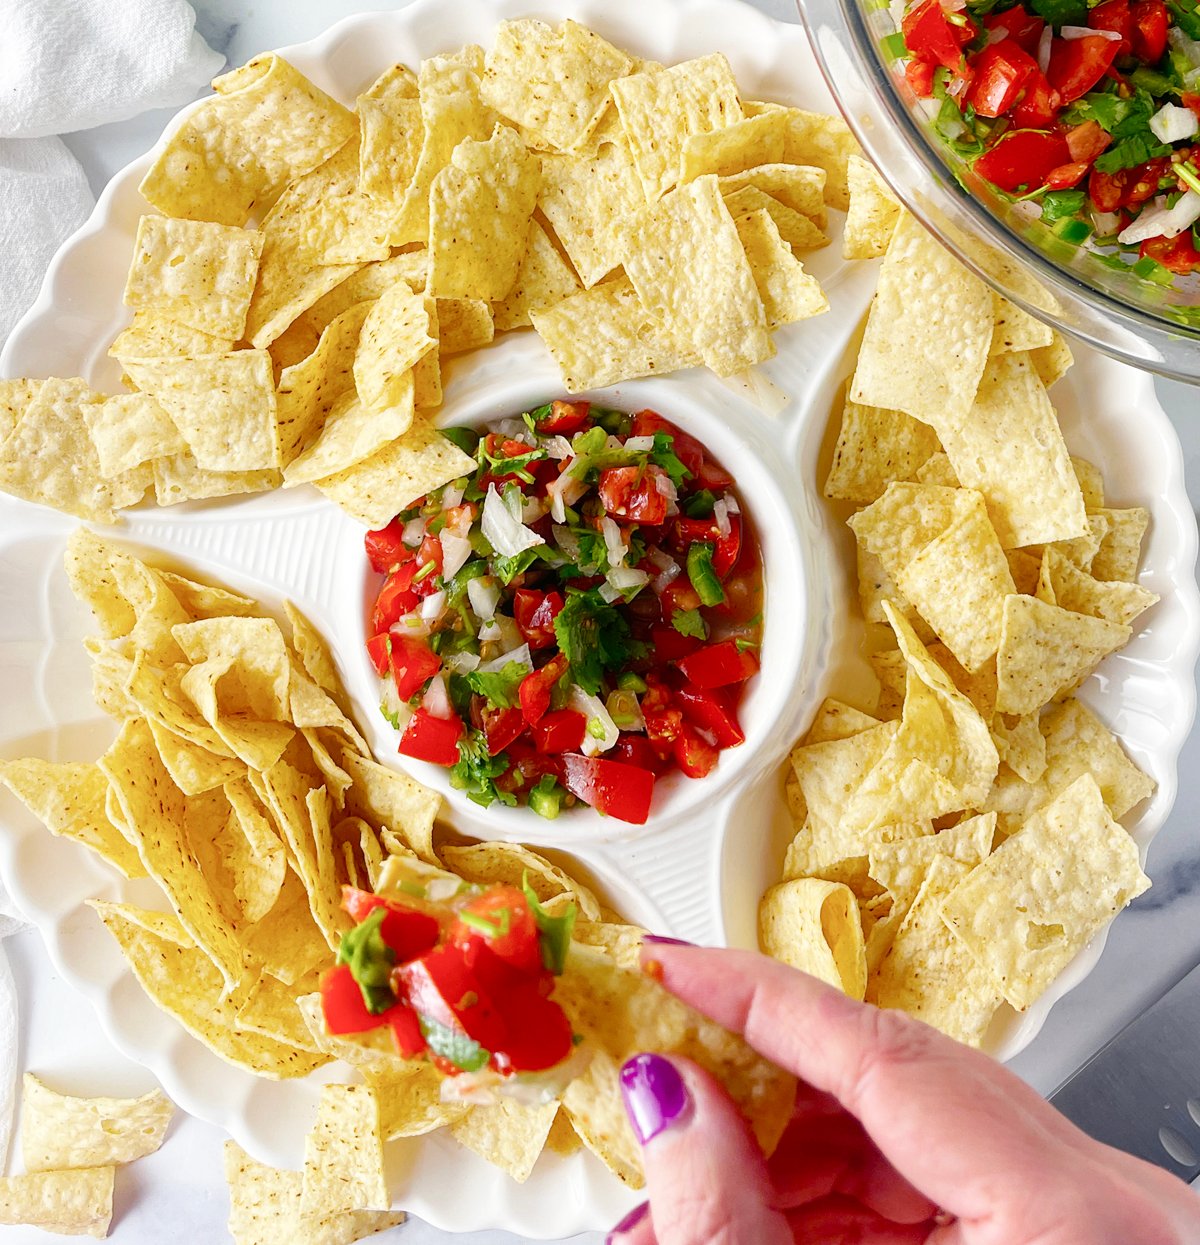 Homemade salsa with chips.